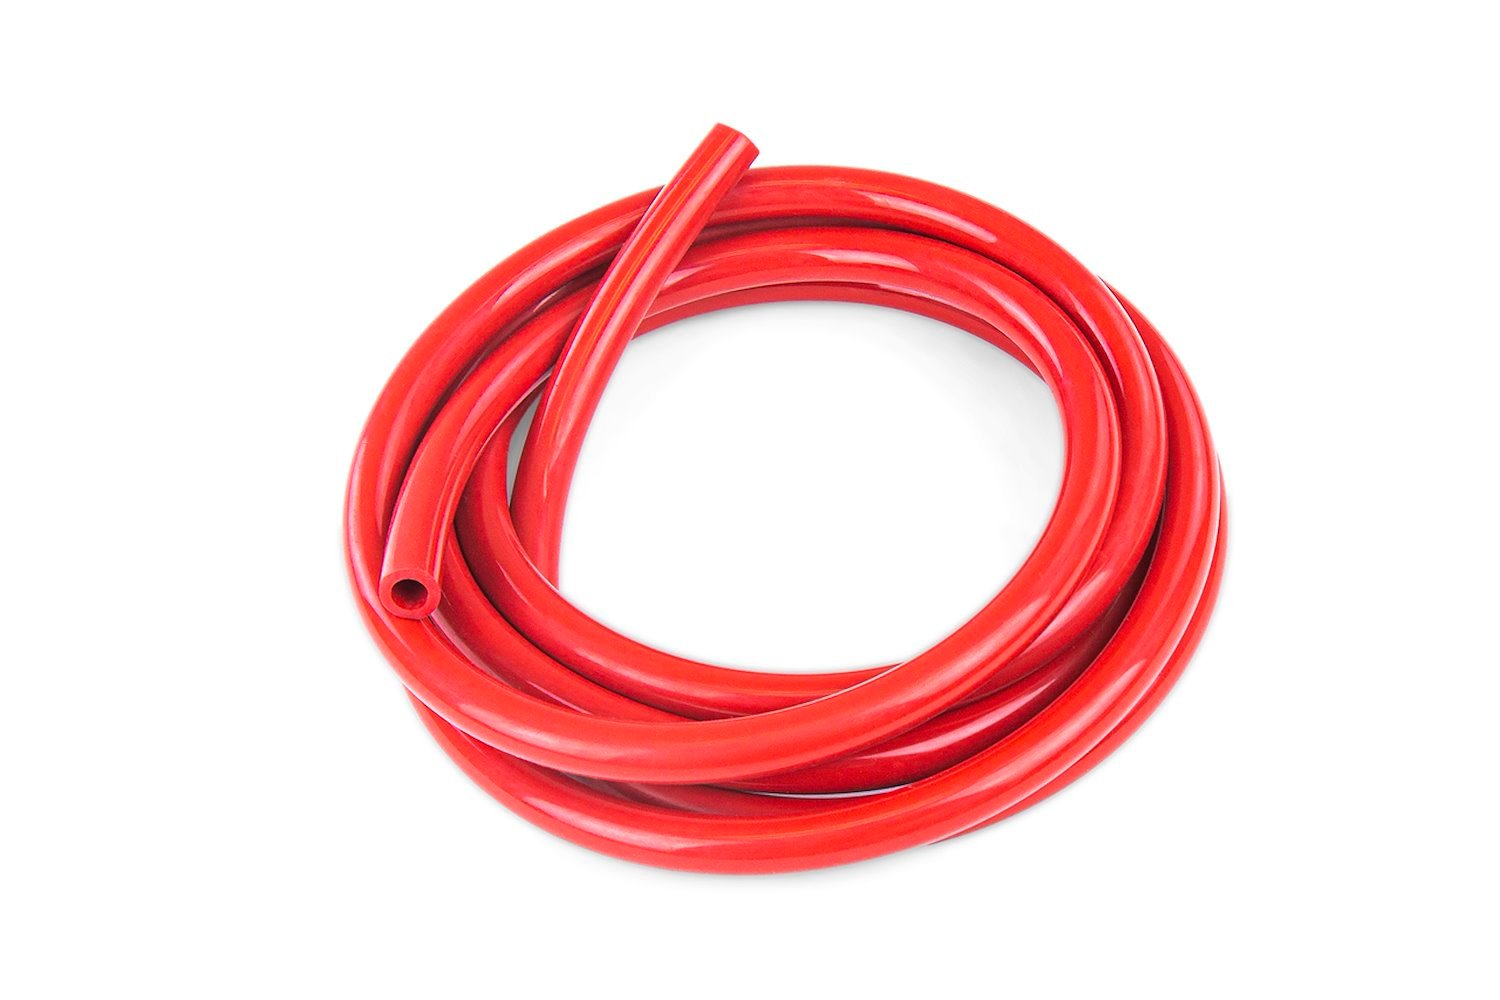 HTSVH4-REDx25 High-Temperature Silicone Vacuum Hose Tubing, 5/32 in. ID, 25 ft. Roll, Red